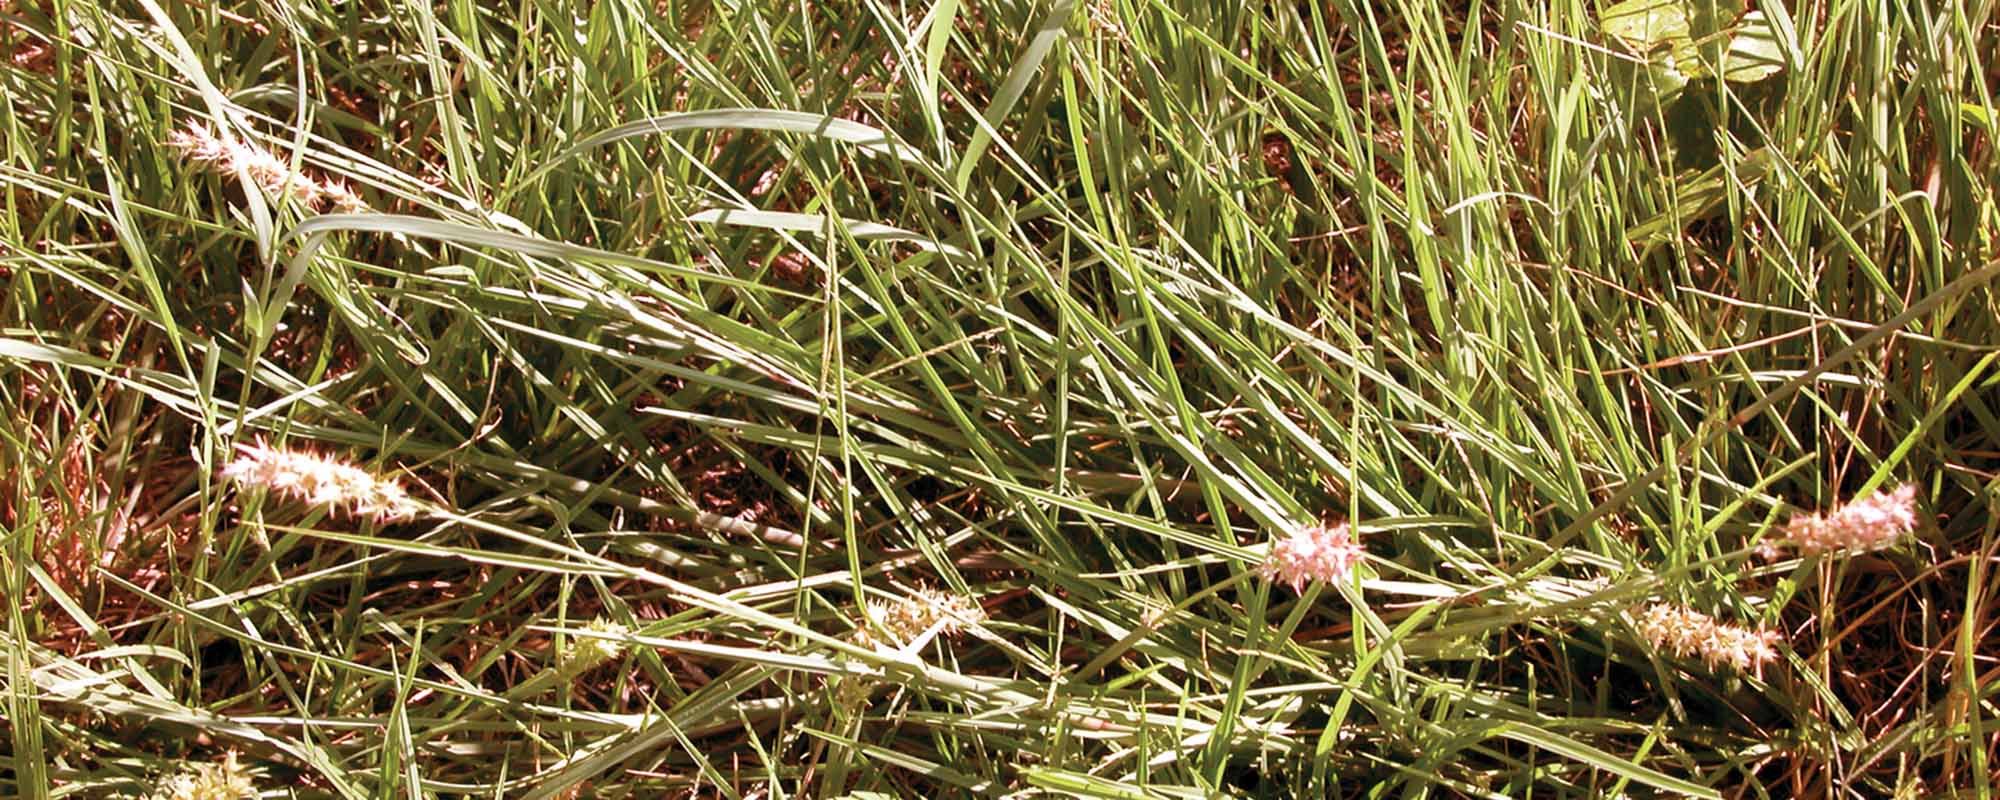 Sandbur Control in Pastures and Hayfields by Dr. Mario A. Villarino, County Extension Agent for Agriculture and Natural Resources